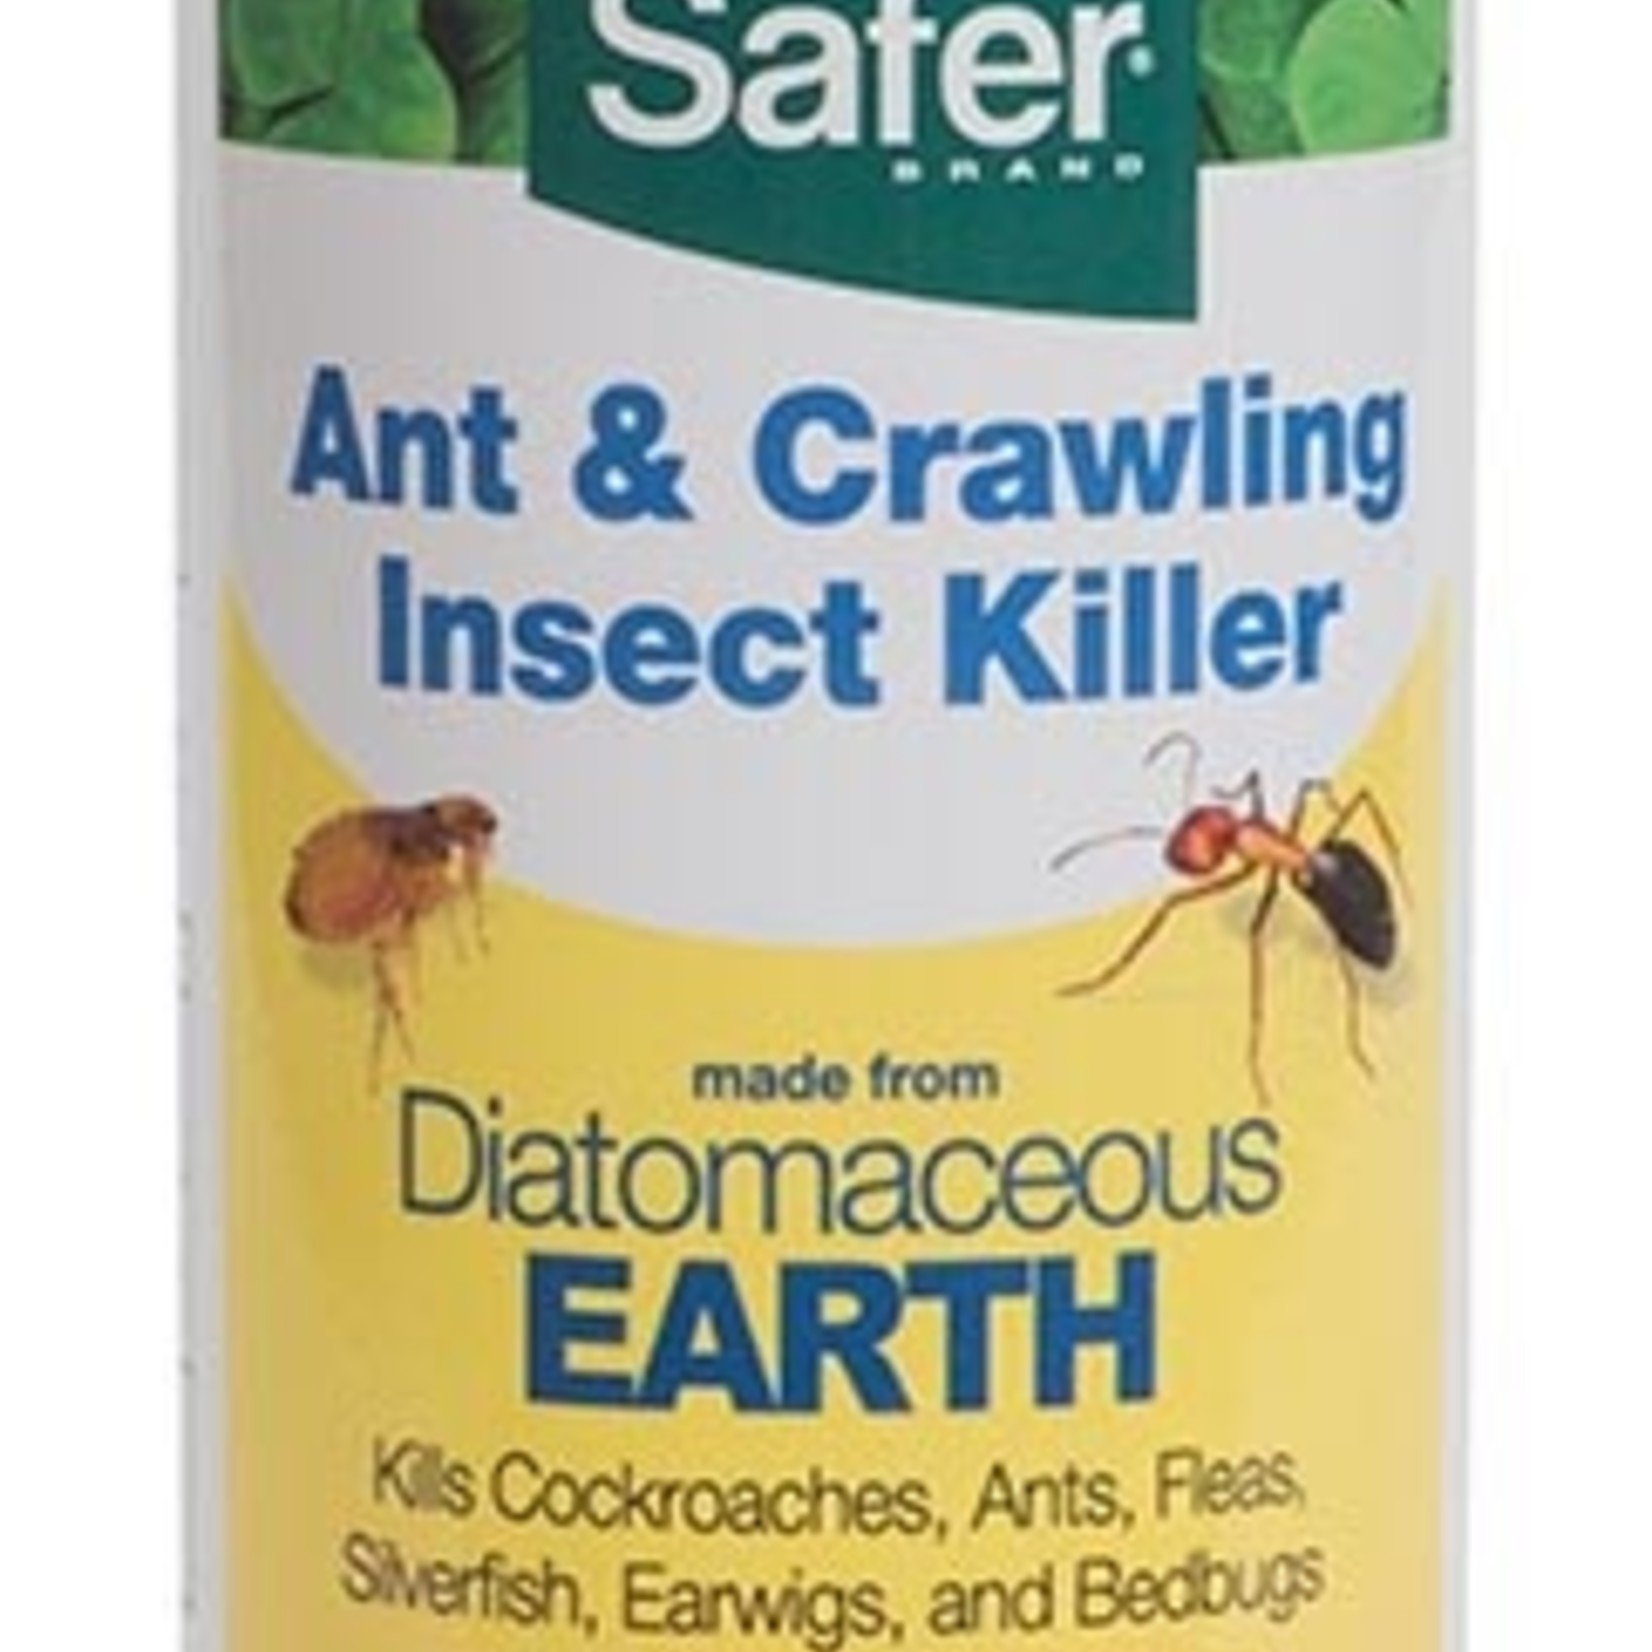 Diatomaceous Earth Ant Crawling Insect Killer 